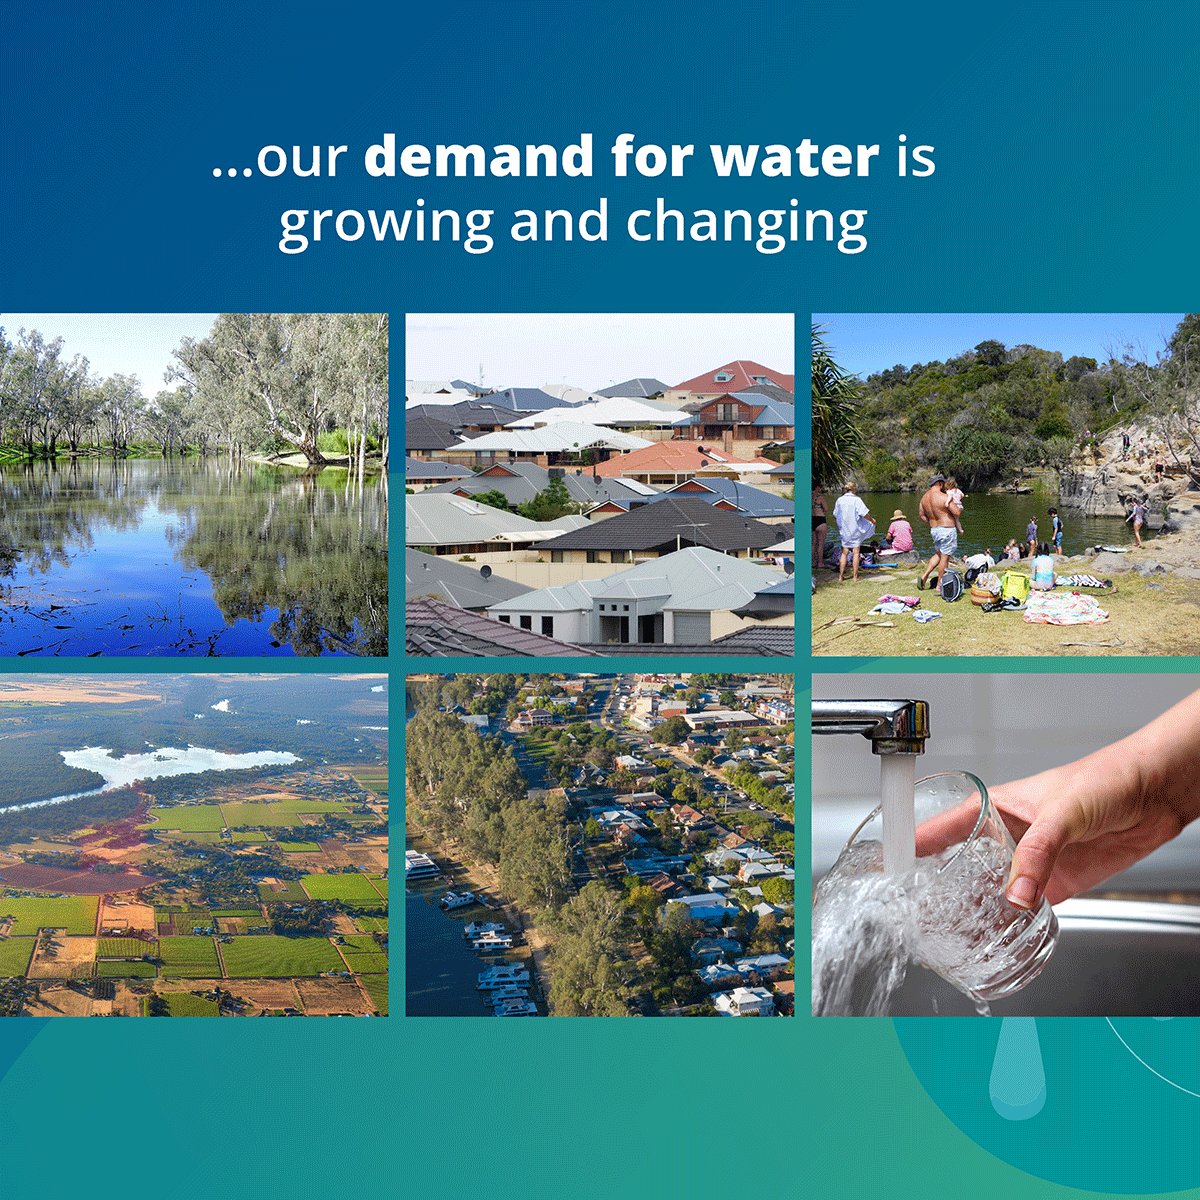 Our demand for water is growing and changing...